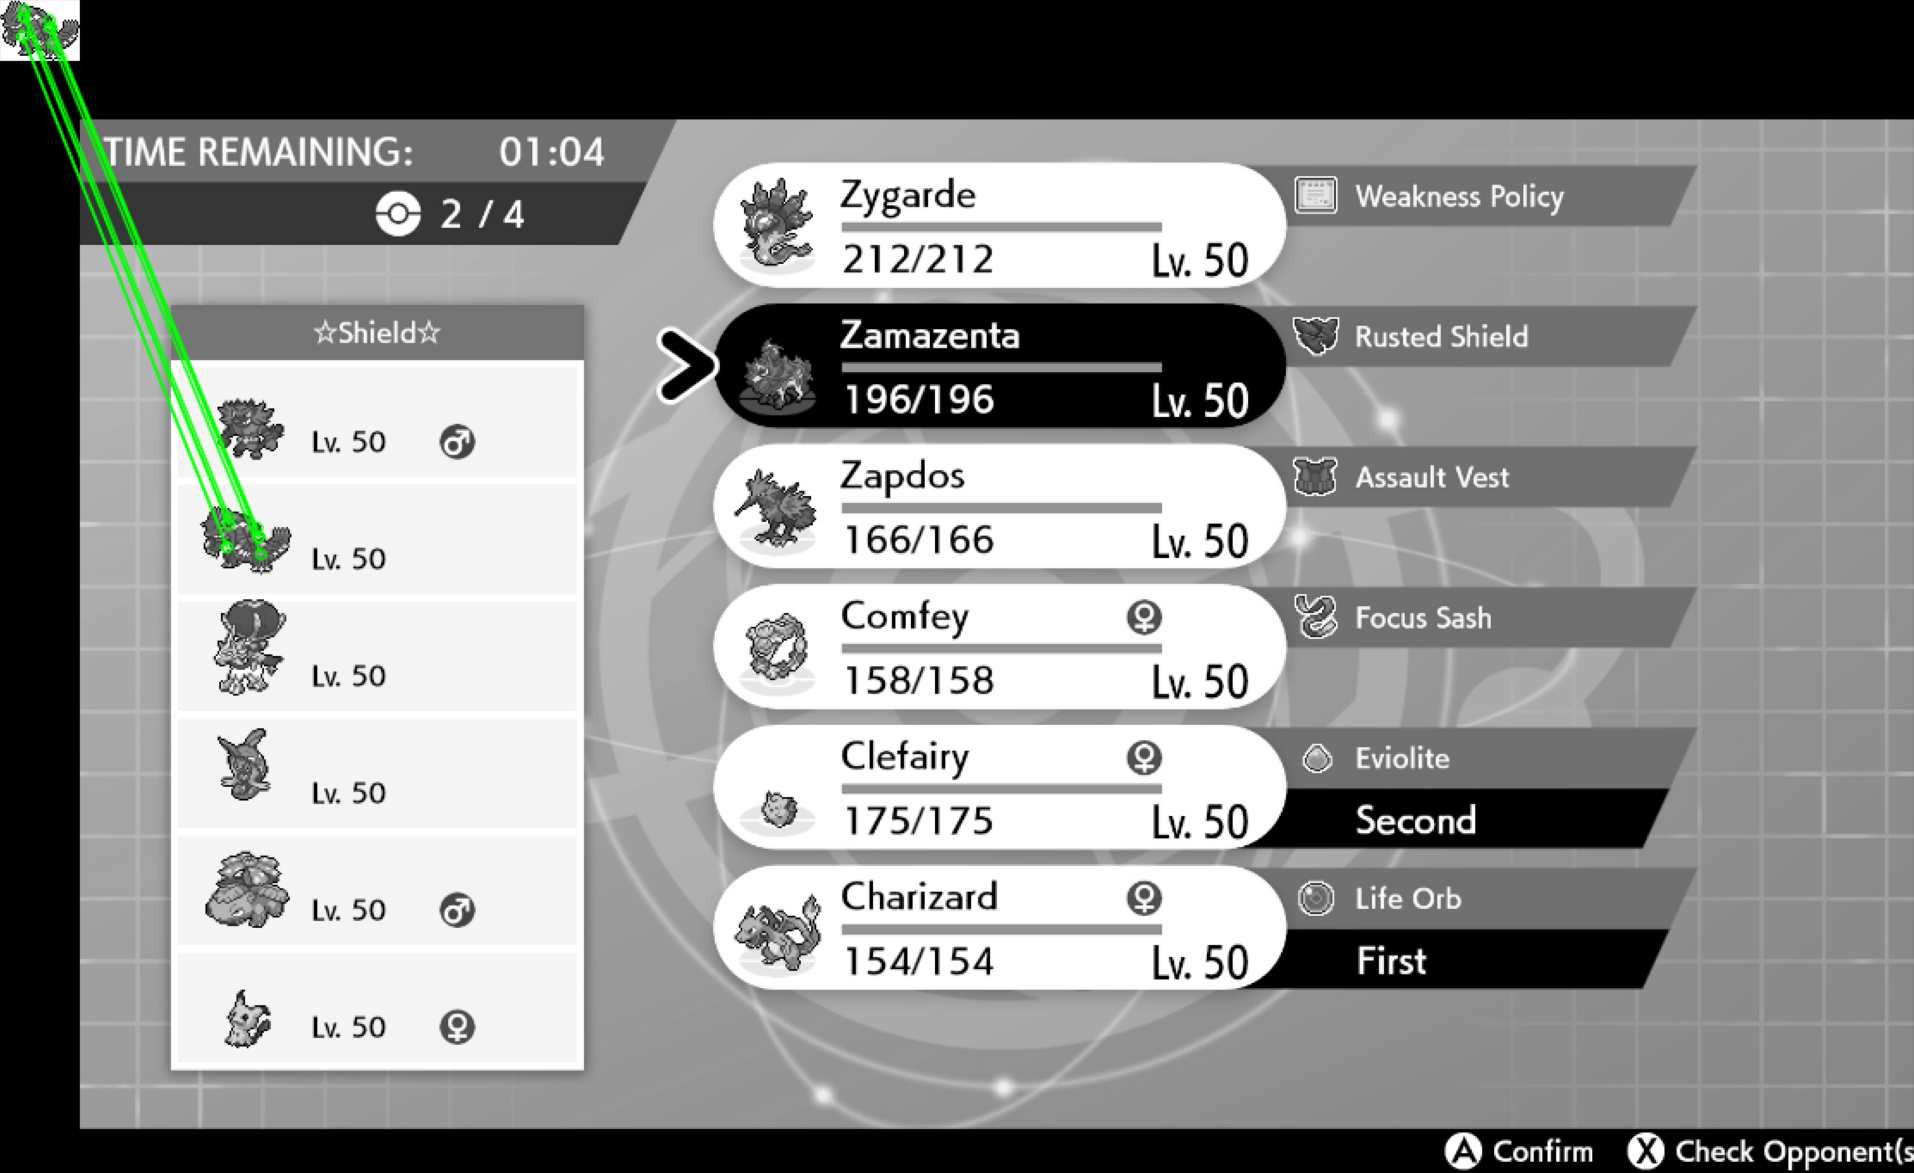 There are two black and white images side-by-side: a mini Groudon sprite and a screenshot of the team preview screen from Pokmon Shield. Five green lines are drawn from different points on the Groudon sprite image to the matching locations on a Groudon sprite that is on the opponent's team in the screenshot.